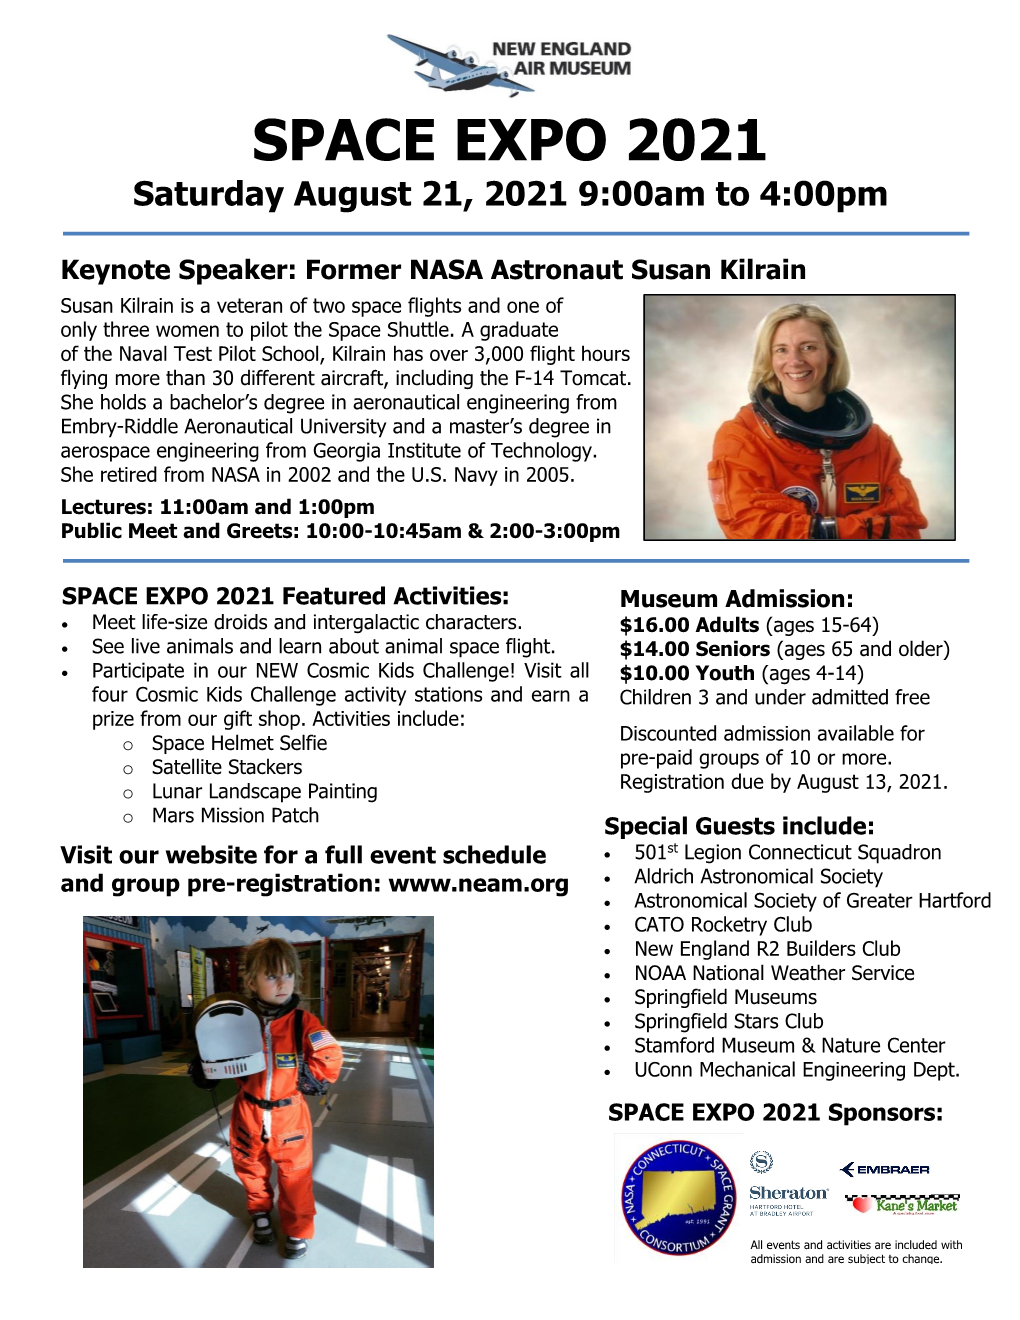 SPACE EXPO 2021 Saturday August 21, 2021 9:00Am to 4:00Pm